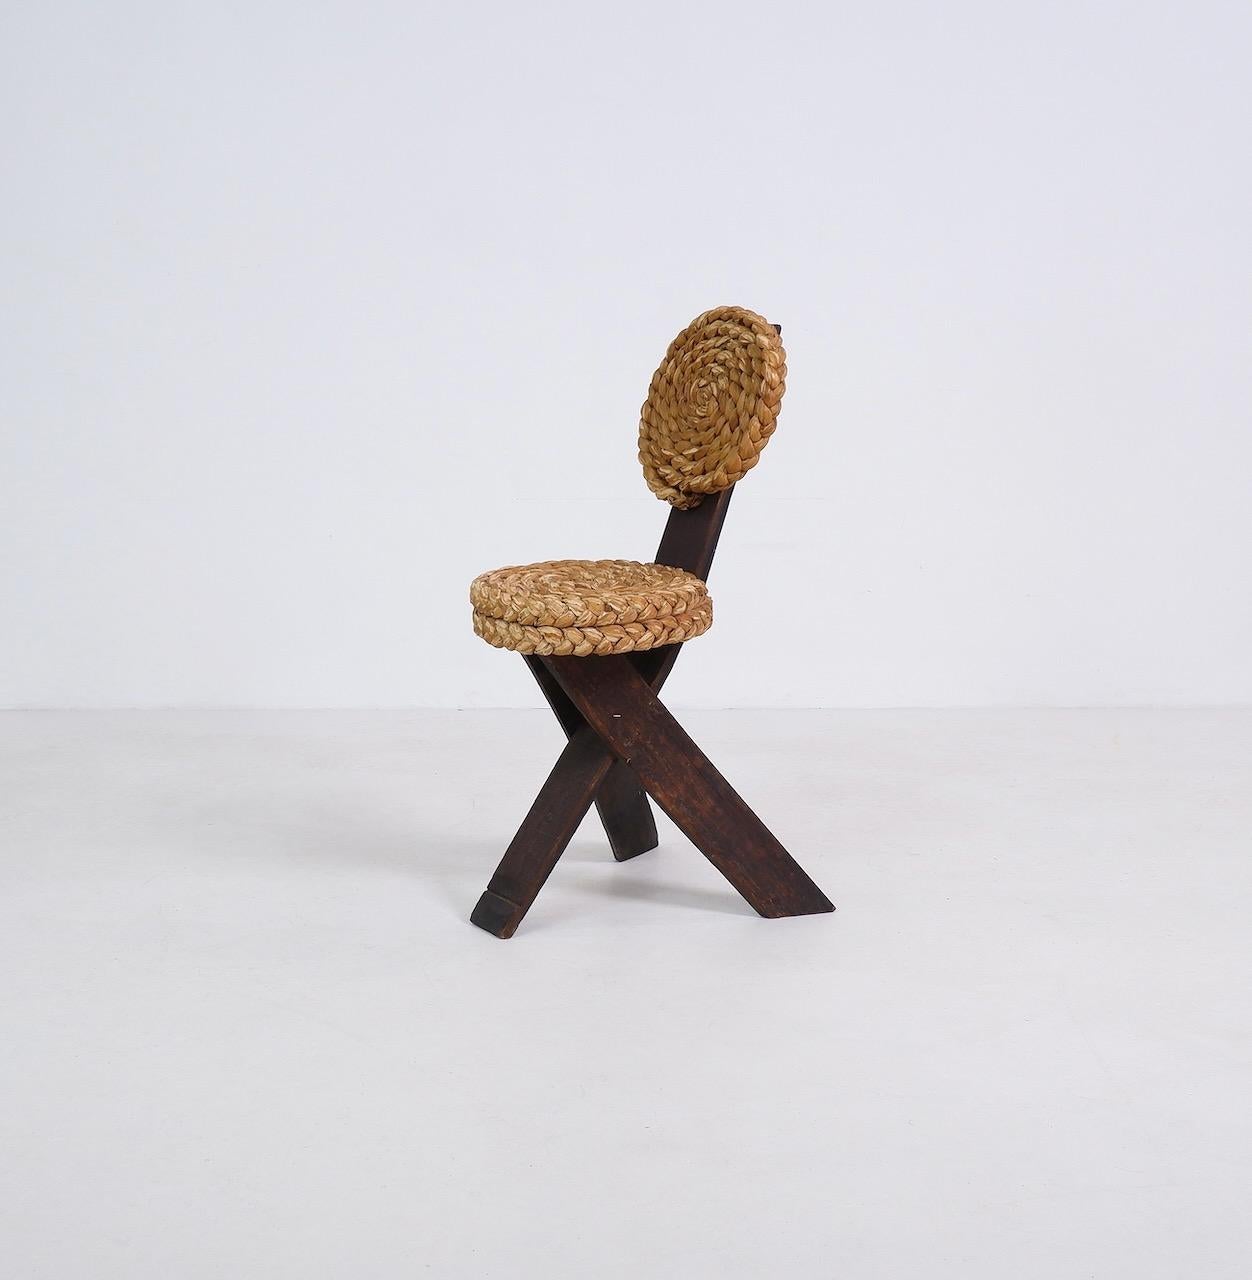 A primitive wood and braided rope side chair designed by Adrien Audoux and Frida Minet, the French designers famed for their inventive use of accessible materials. 

Dimensions (cm, approx): 
Height: 80
Width: 37
Depth: 50
Height to seat: 47